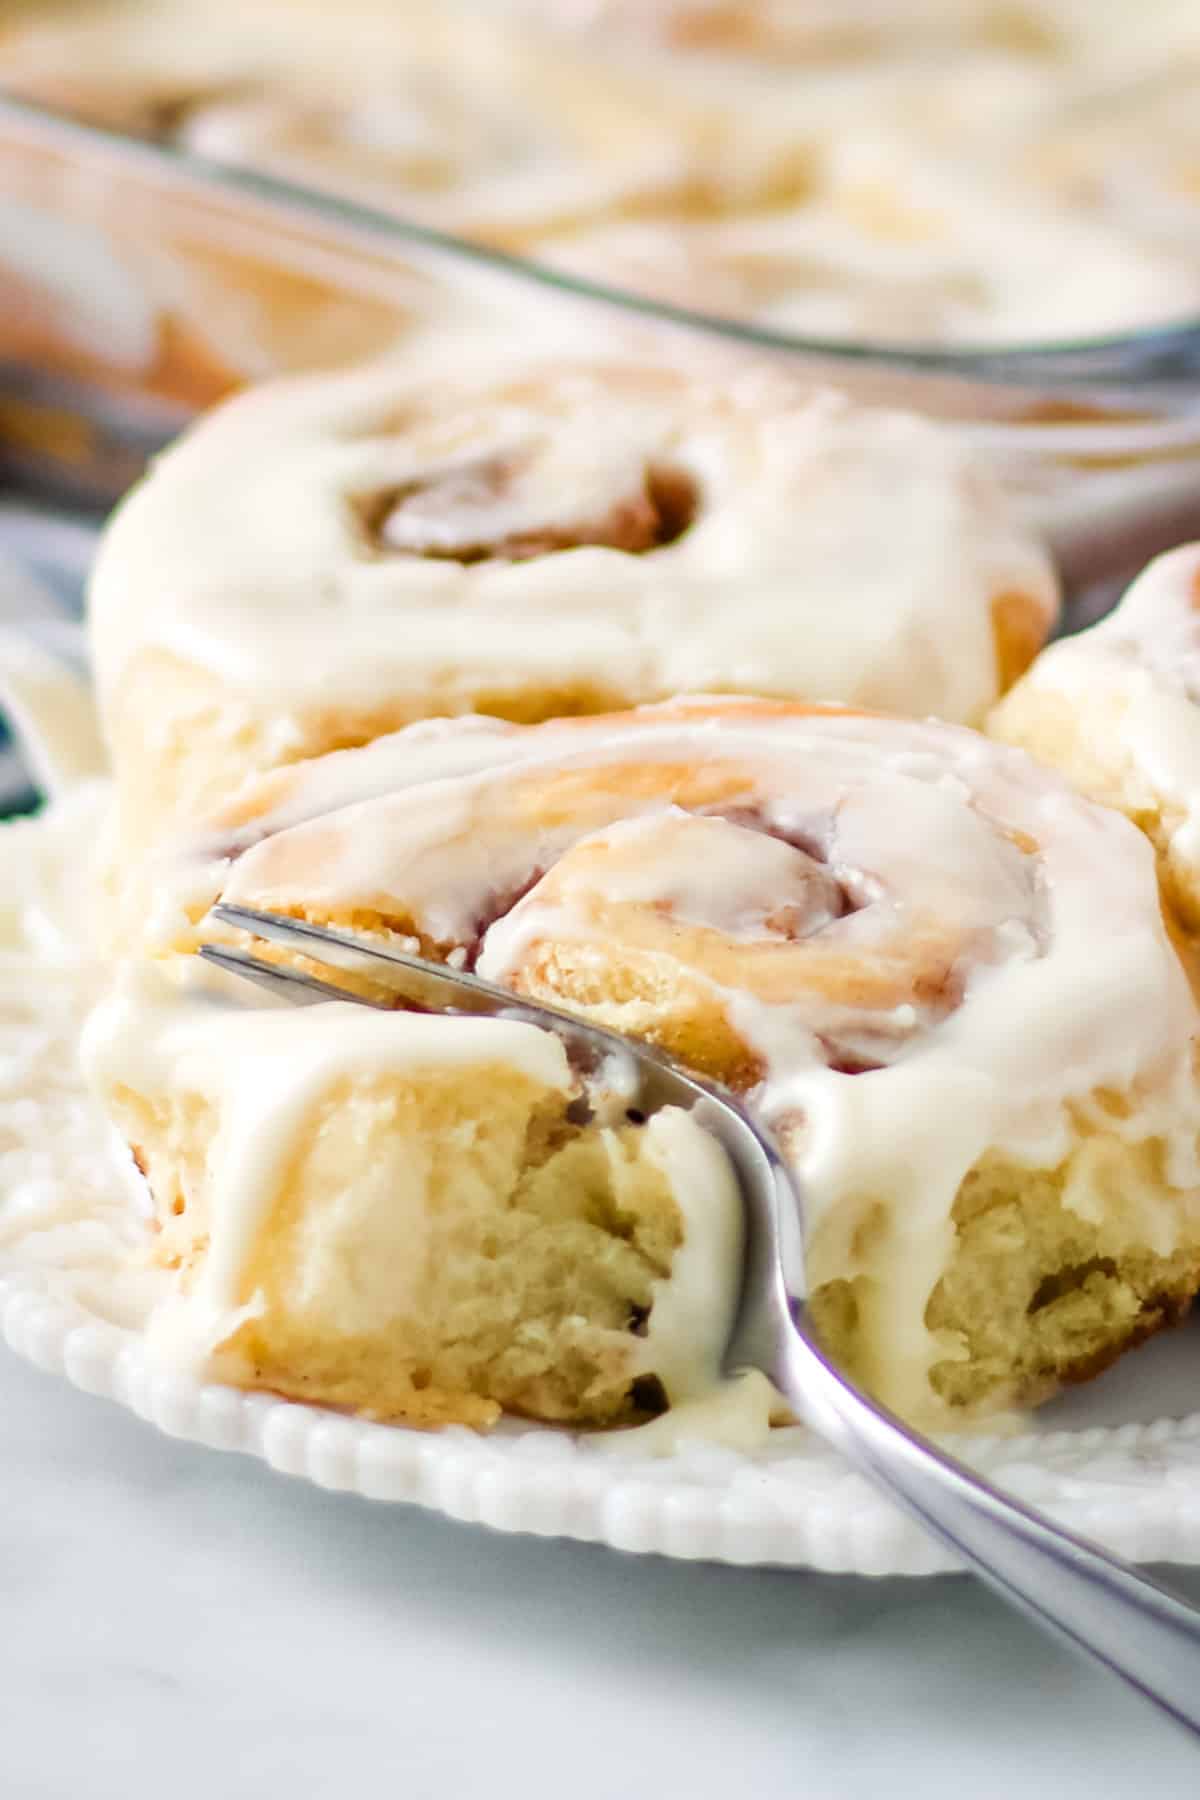 Cutting into a homemade cinnamon roll topped with cream cheese frosting with a silver fork.